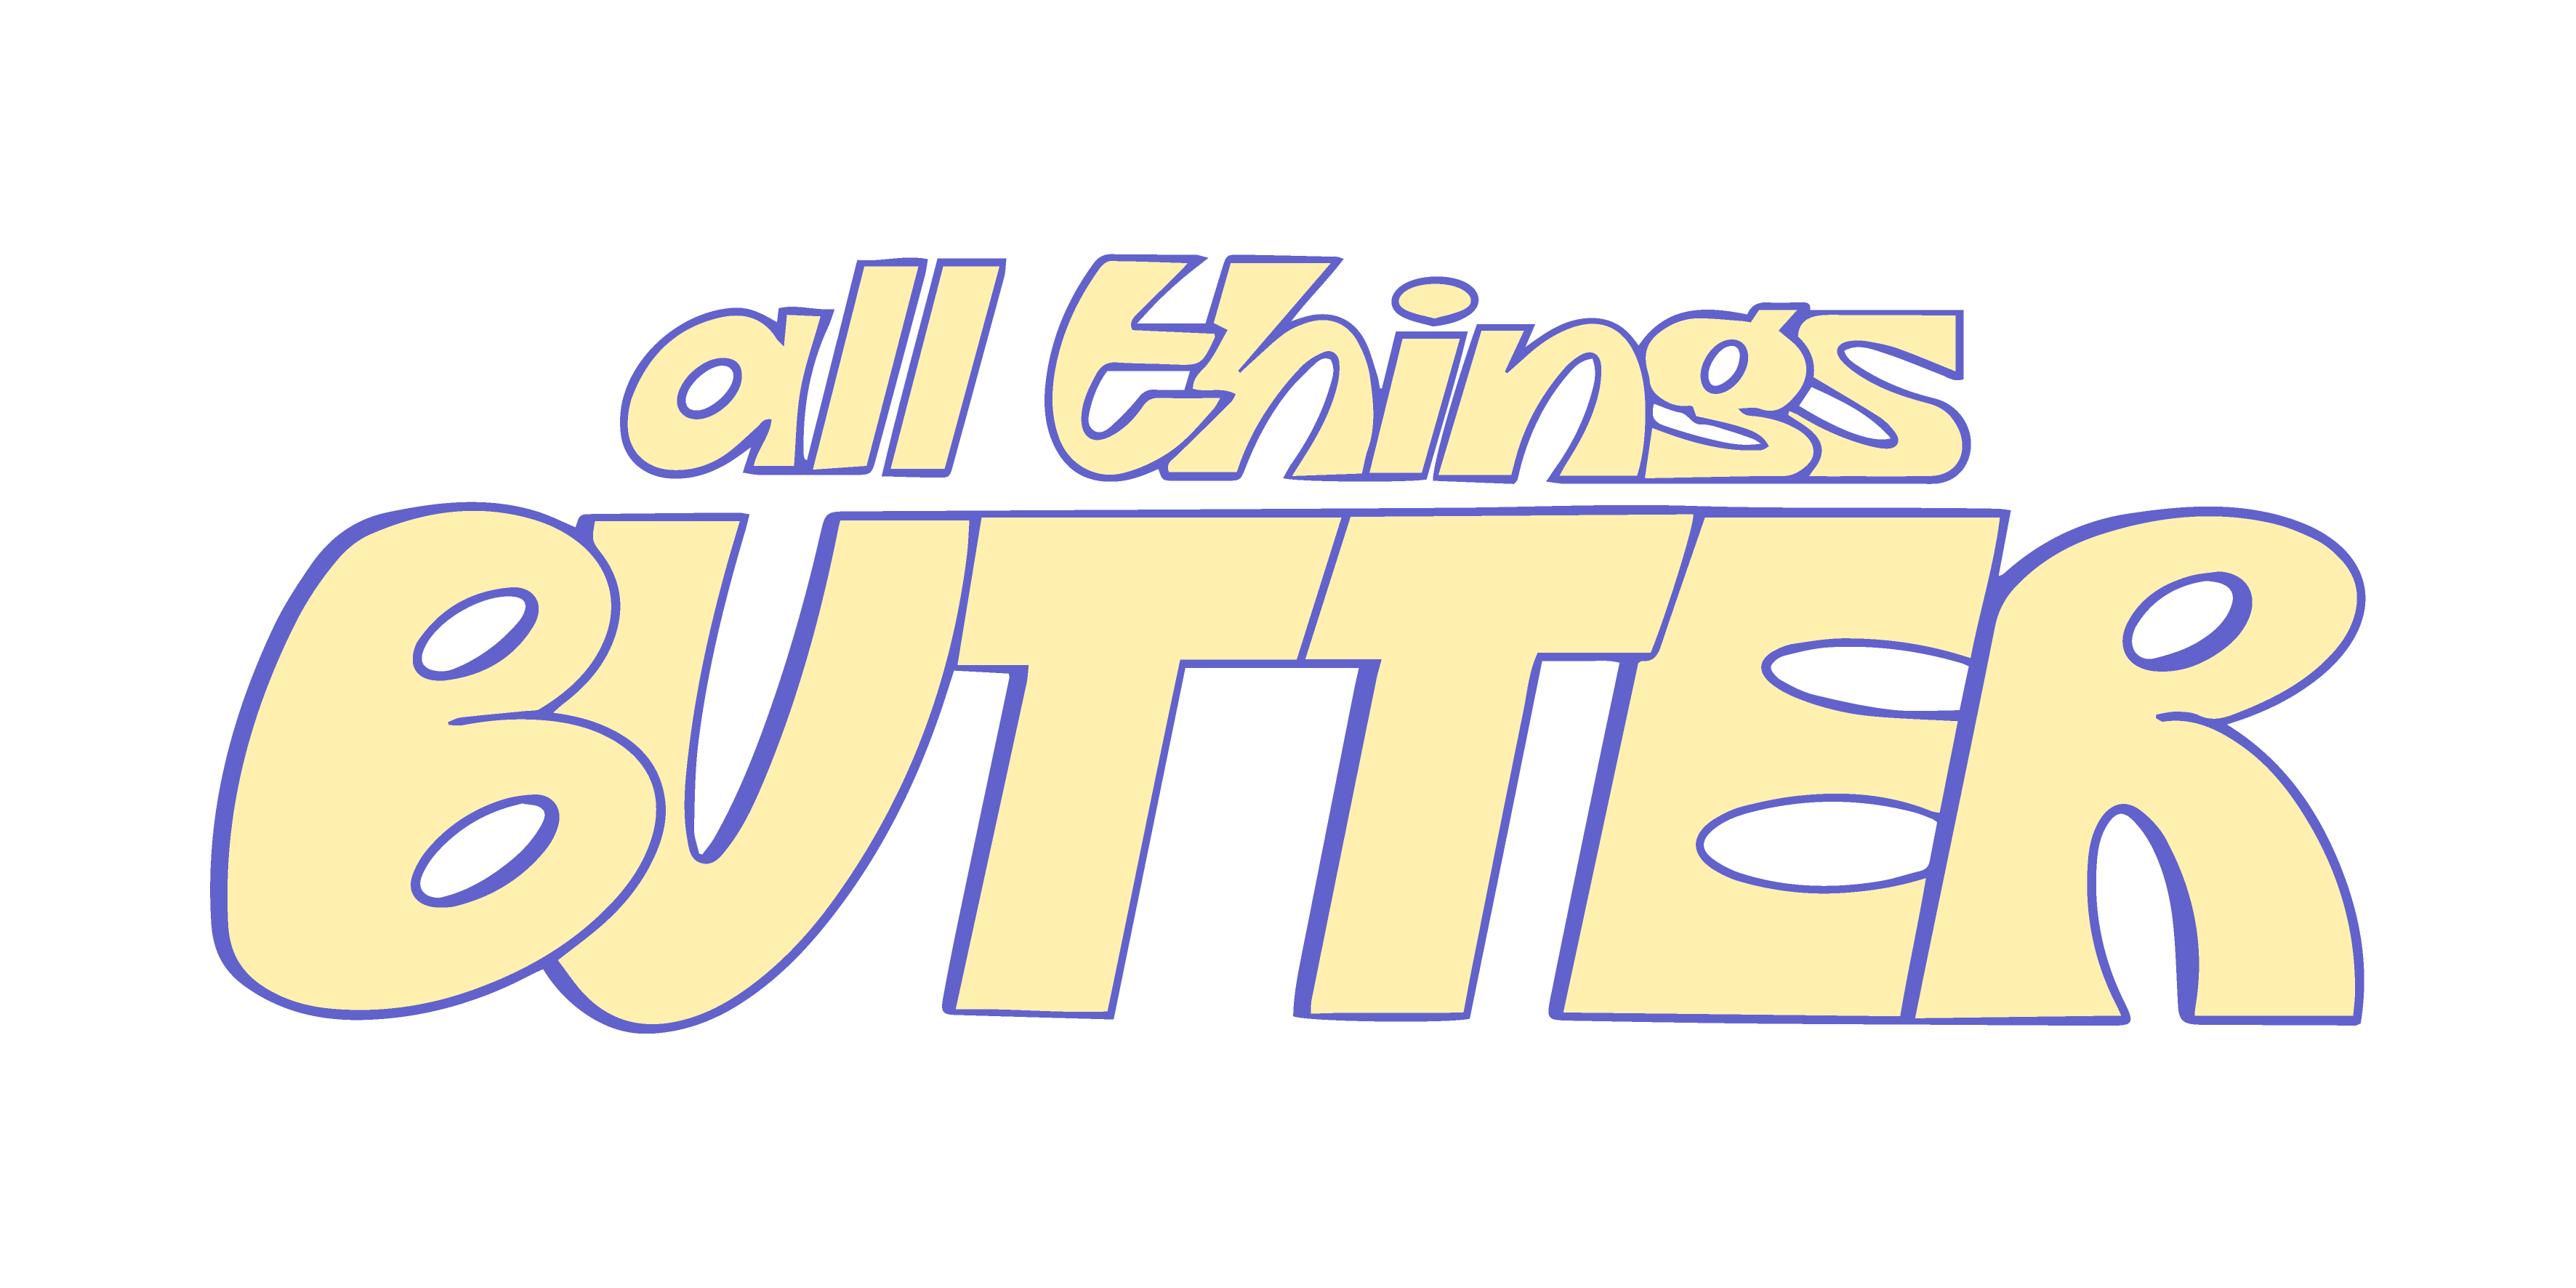 All things butter logo